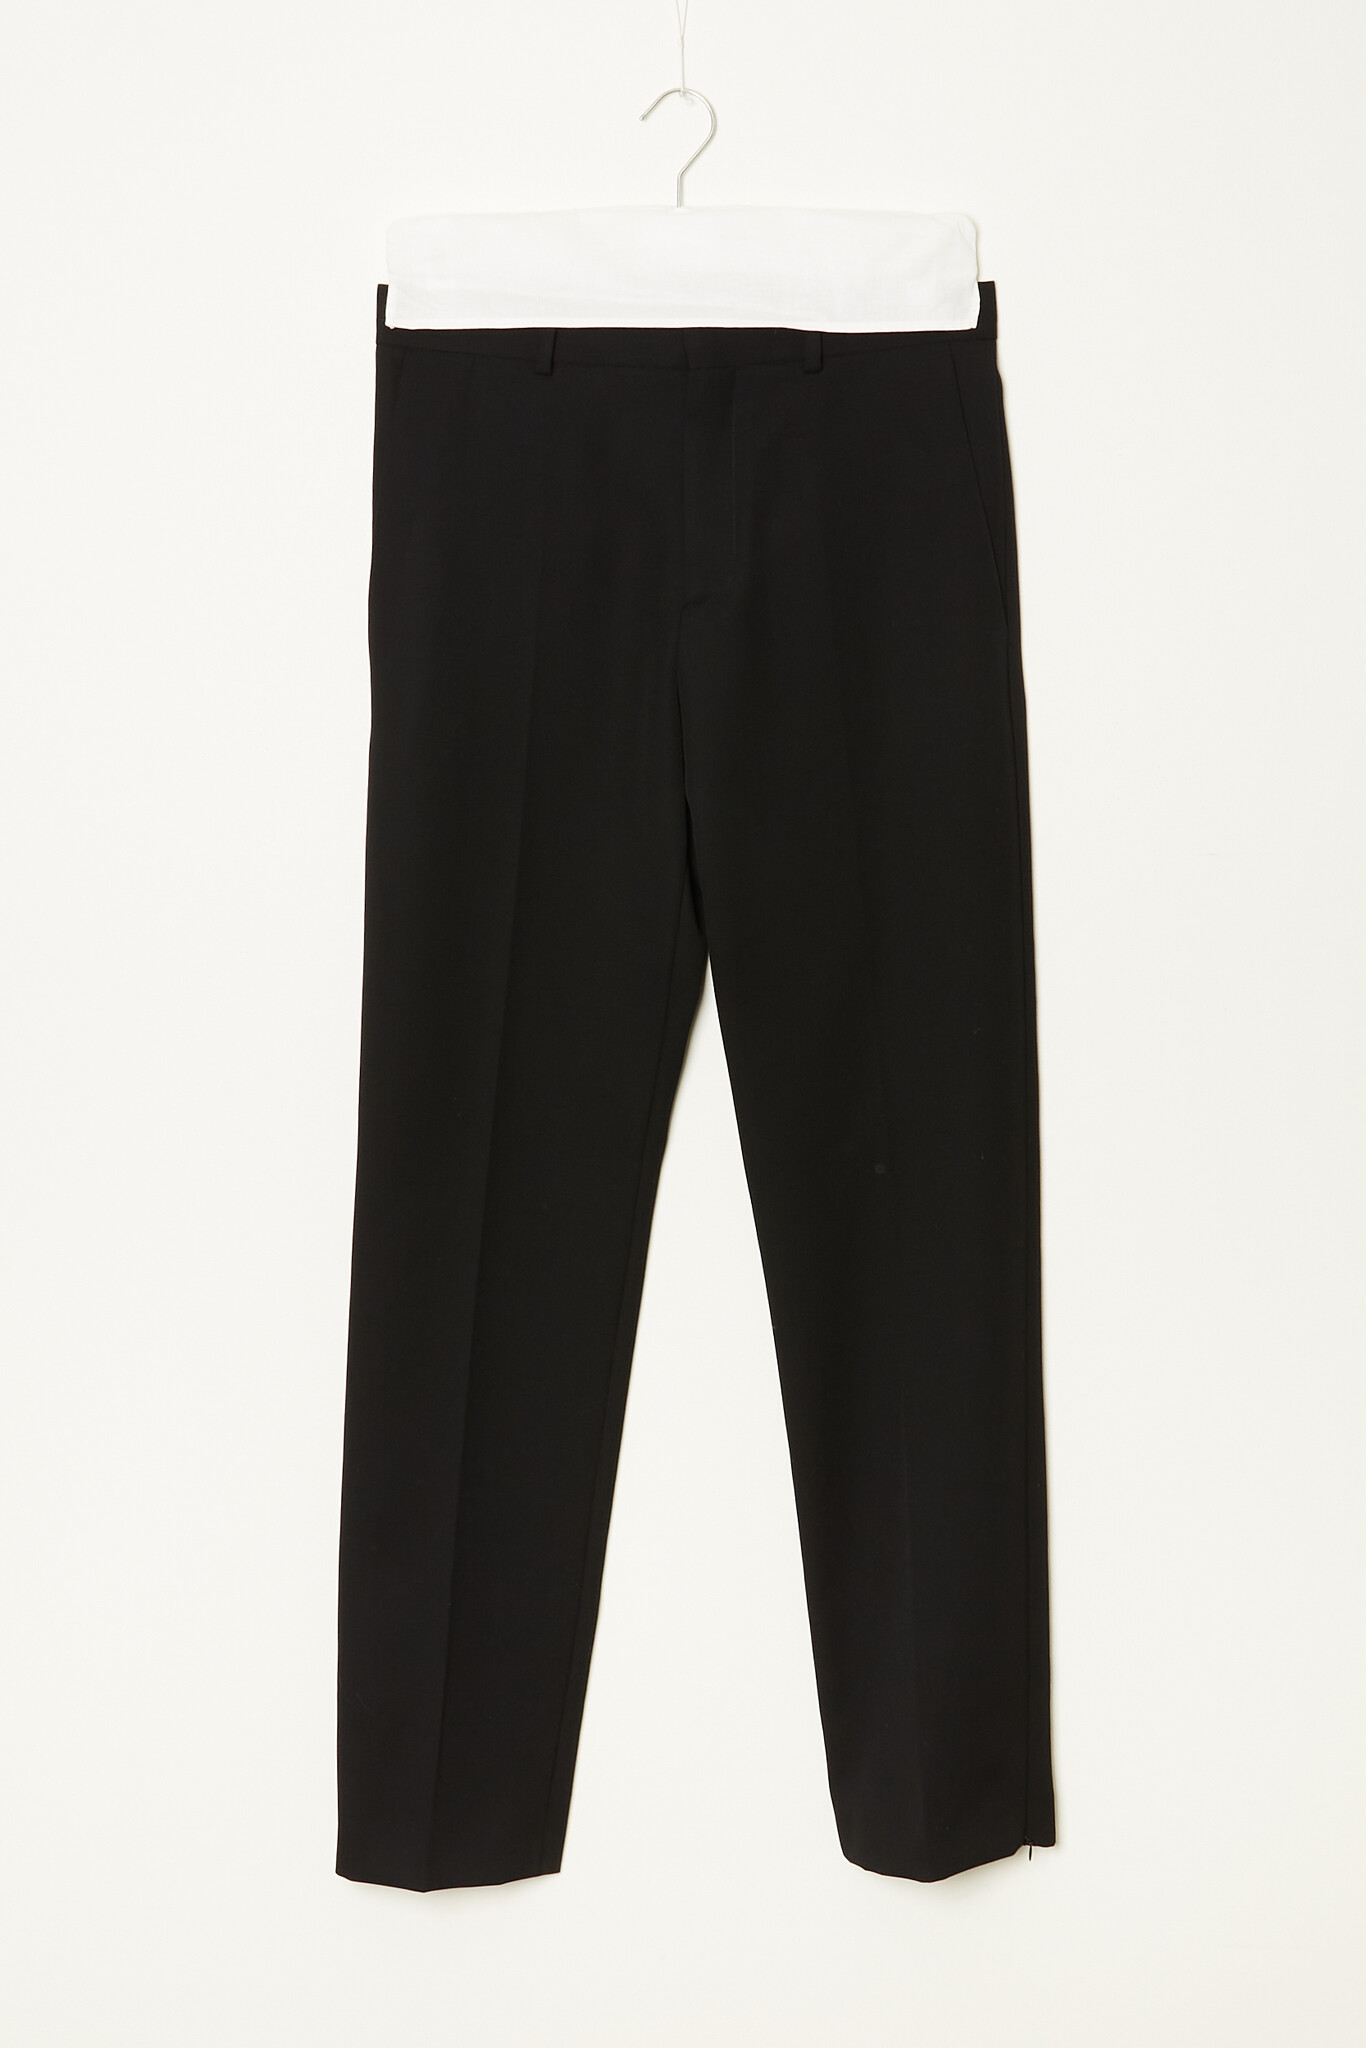 Botter Slim fit trousers